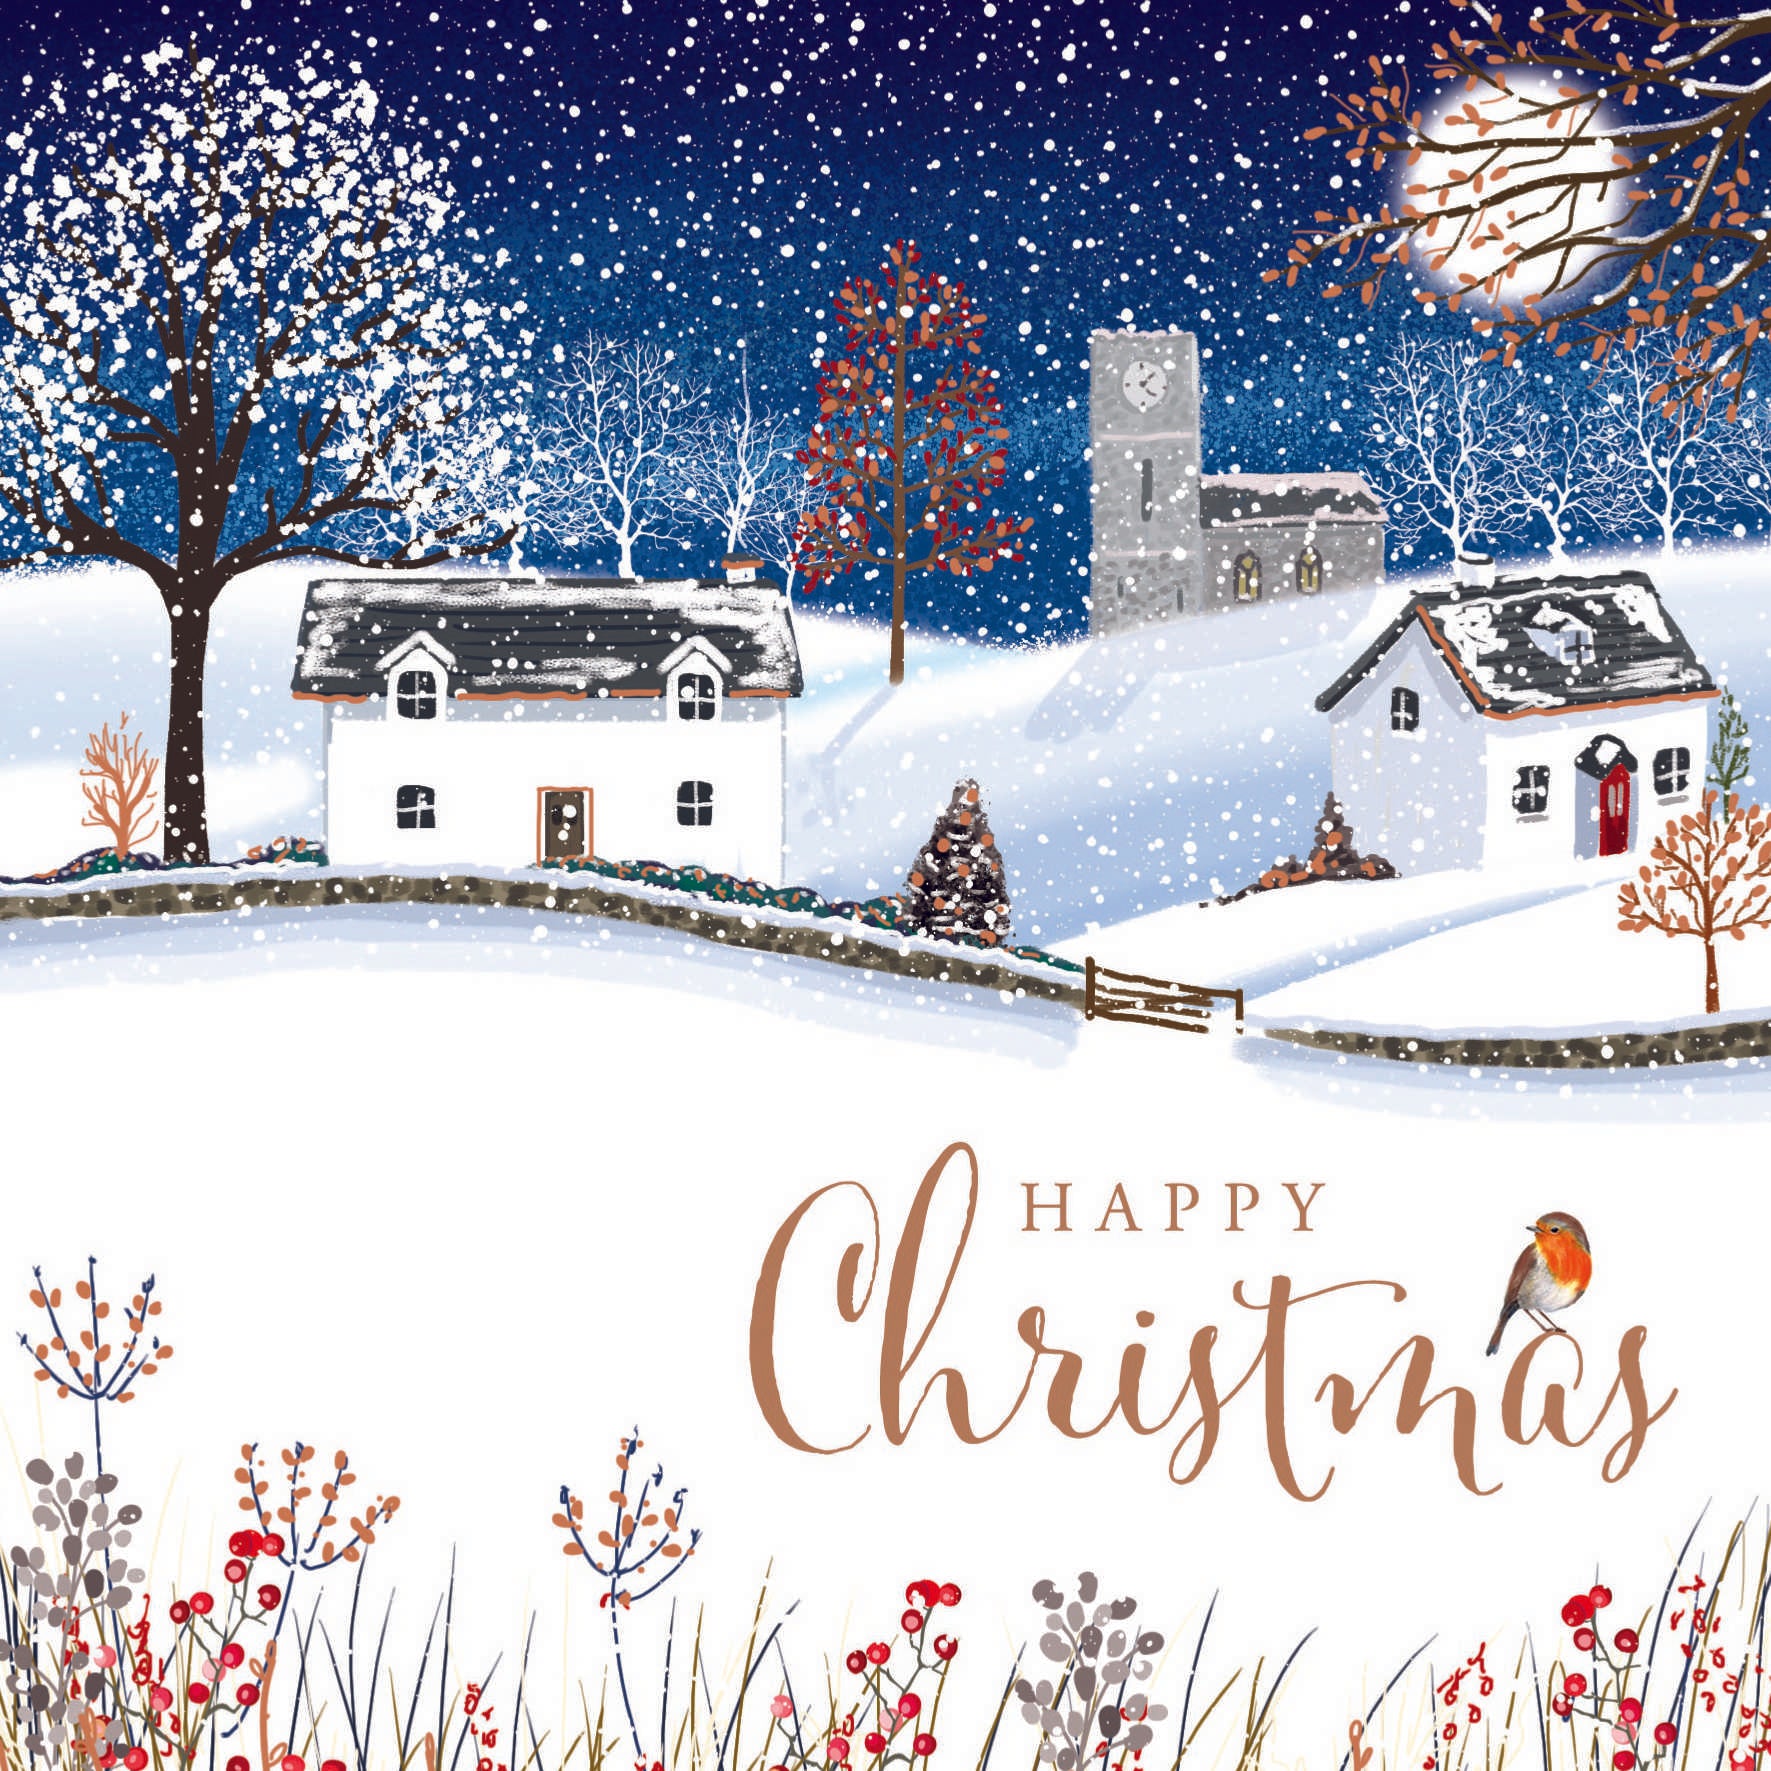 The design is illustrated and shows two houses and a church in a snowy countryside setting. In the bottom corner “Happy Christmas” is written in golden text with a robin perched on top. 